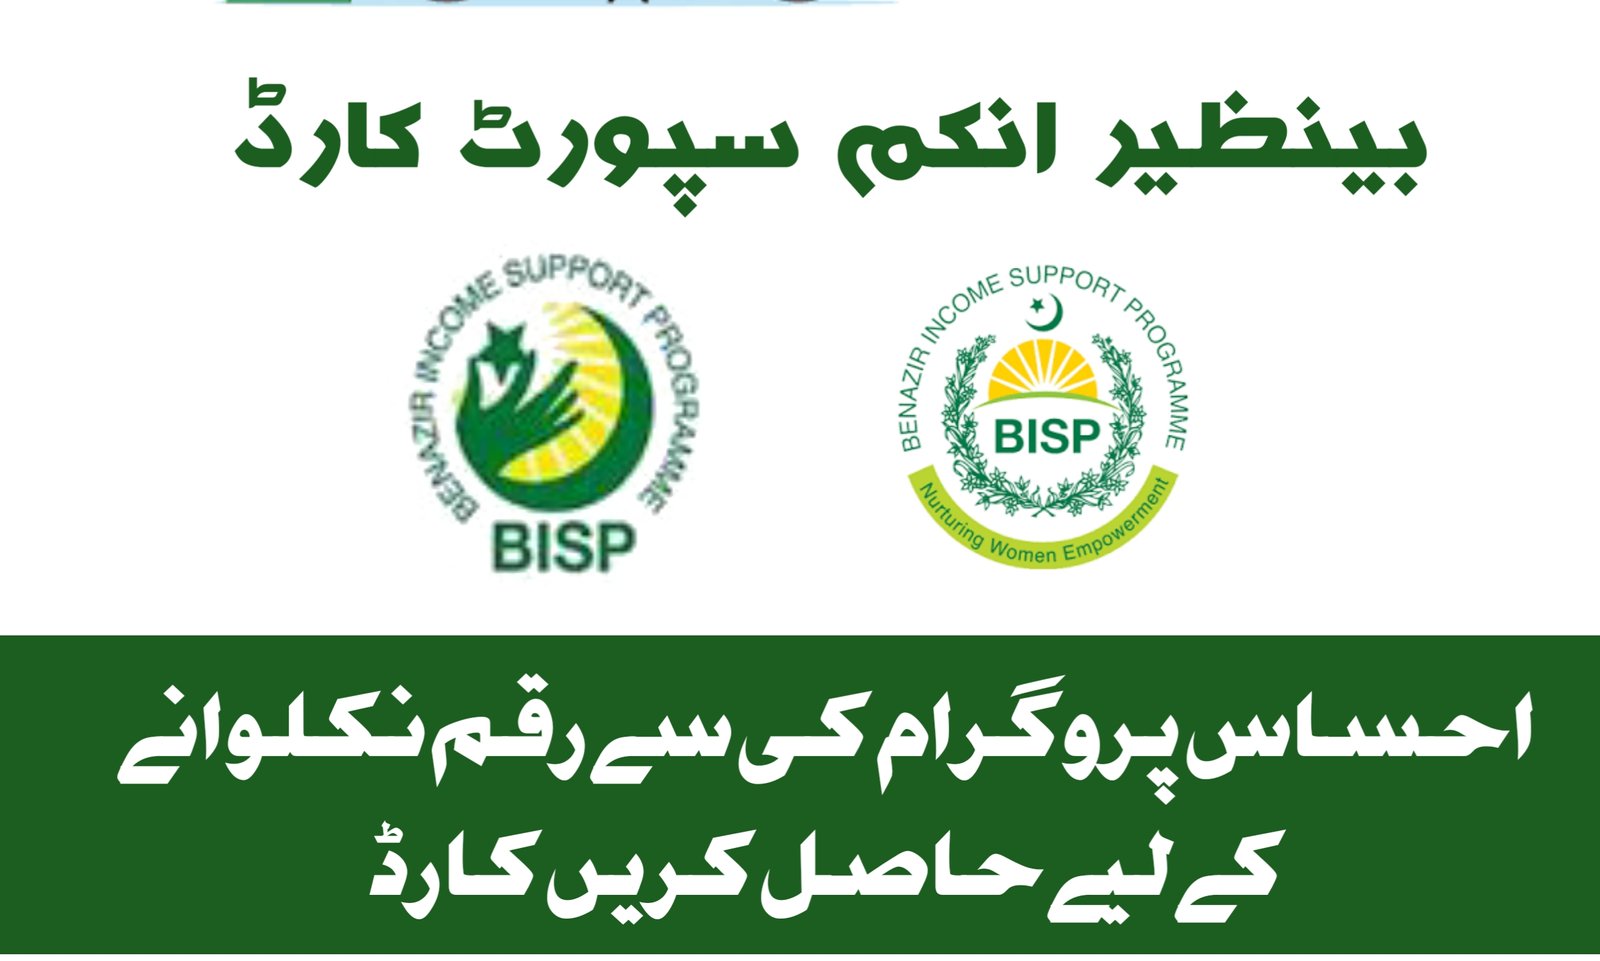 Apply For A New BISP card in Ehsaas Program